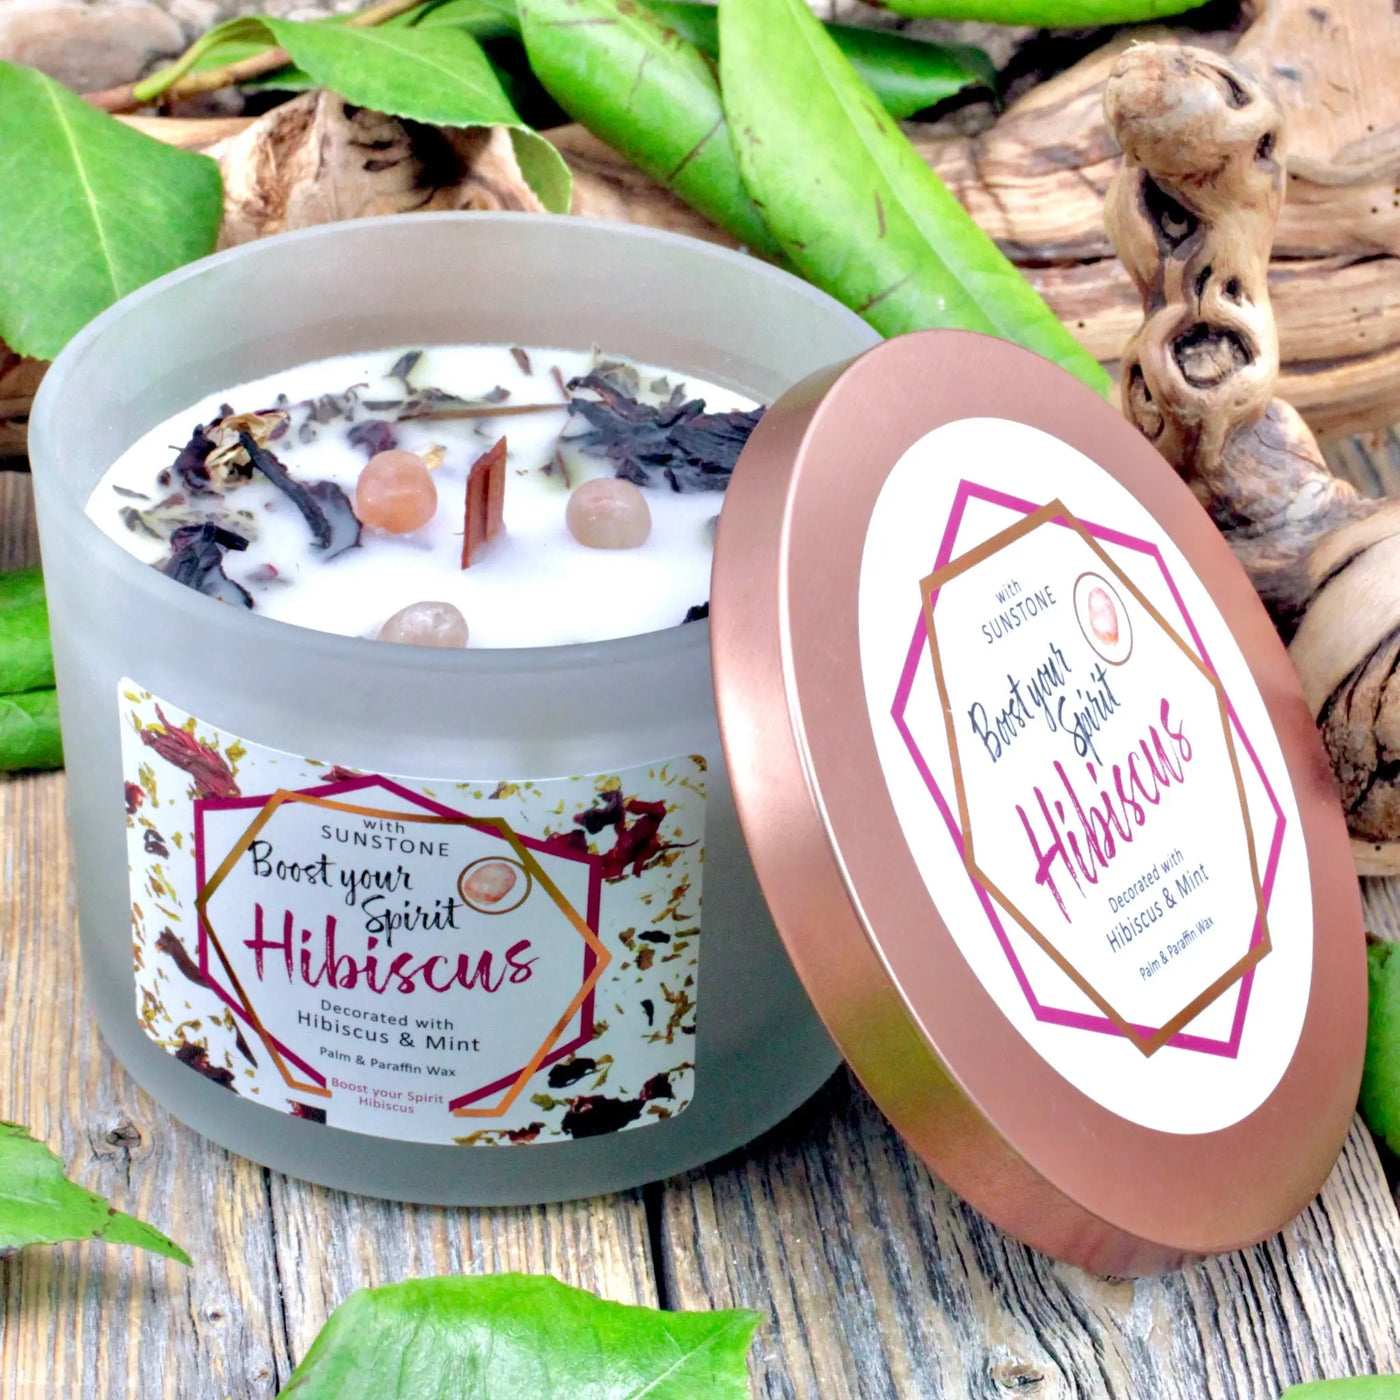 Boost Your Spirit Hibiscus Candle with Sunstone